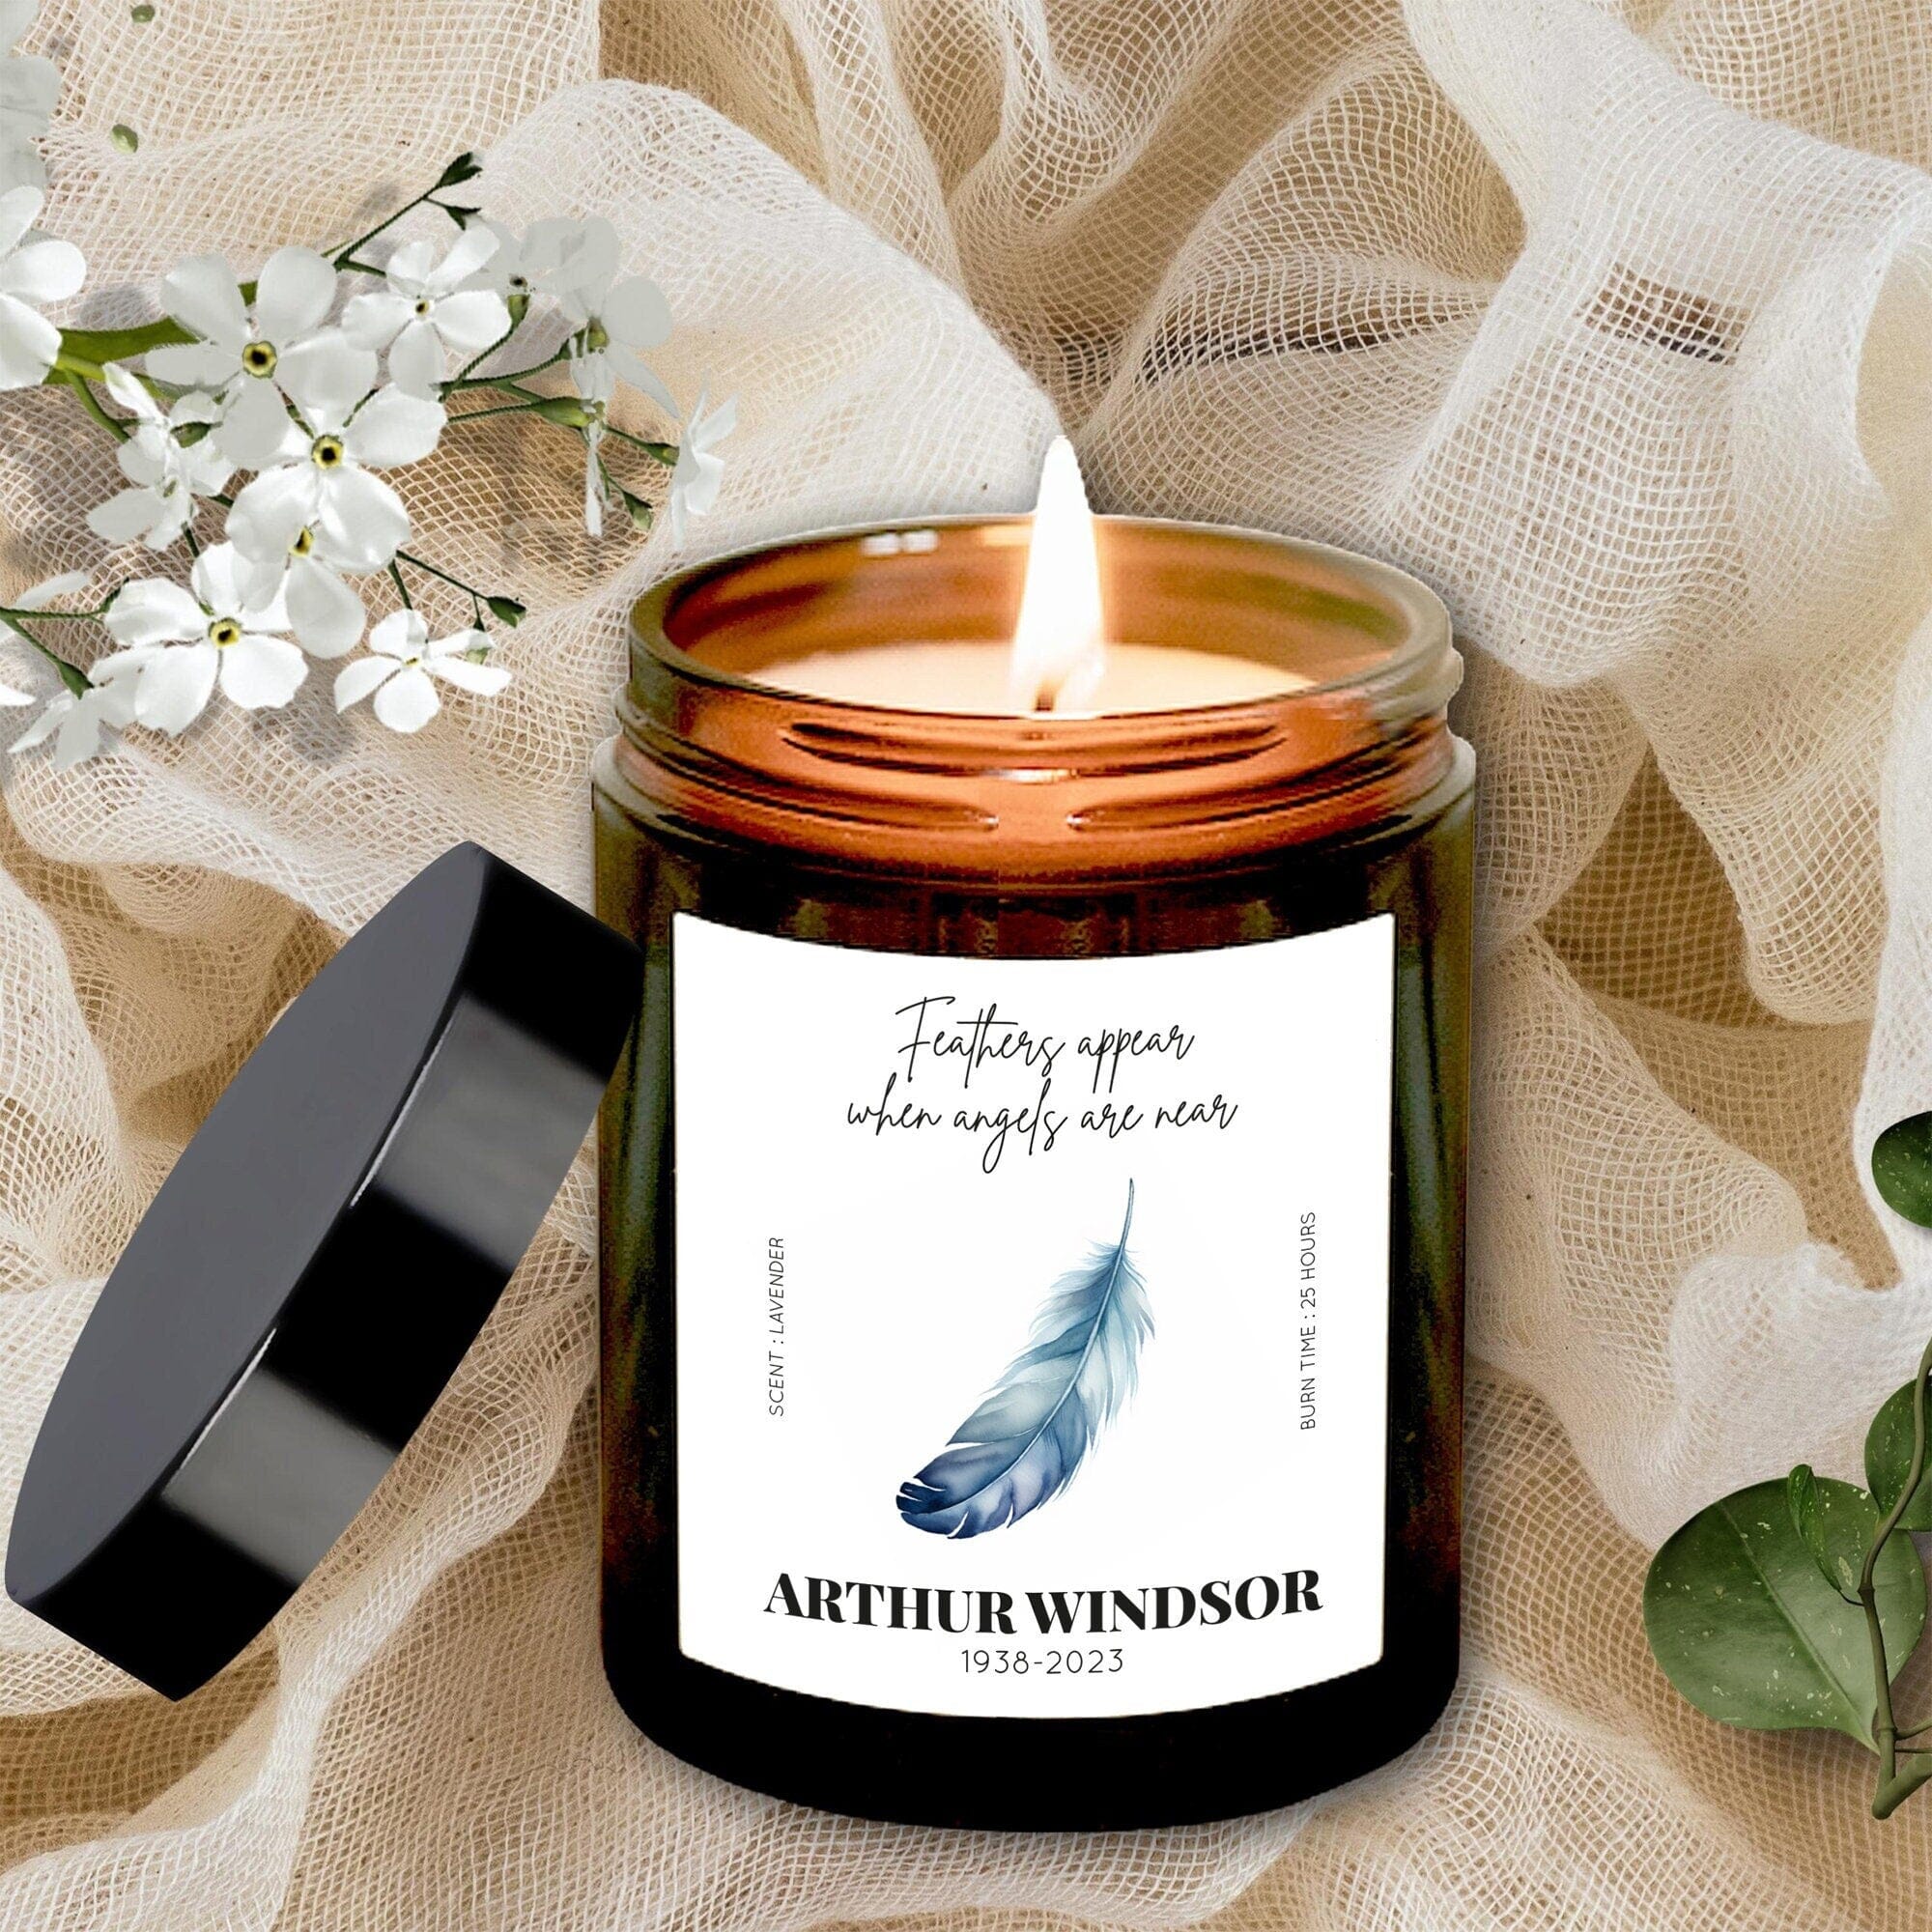 Personalised Memorial Scented Candle, Feathers appear when angels are near, Bereavement Mourning Keepsake